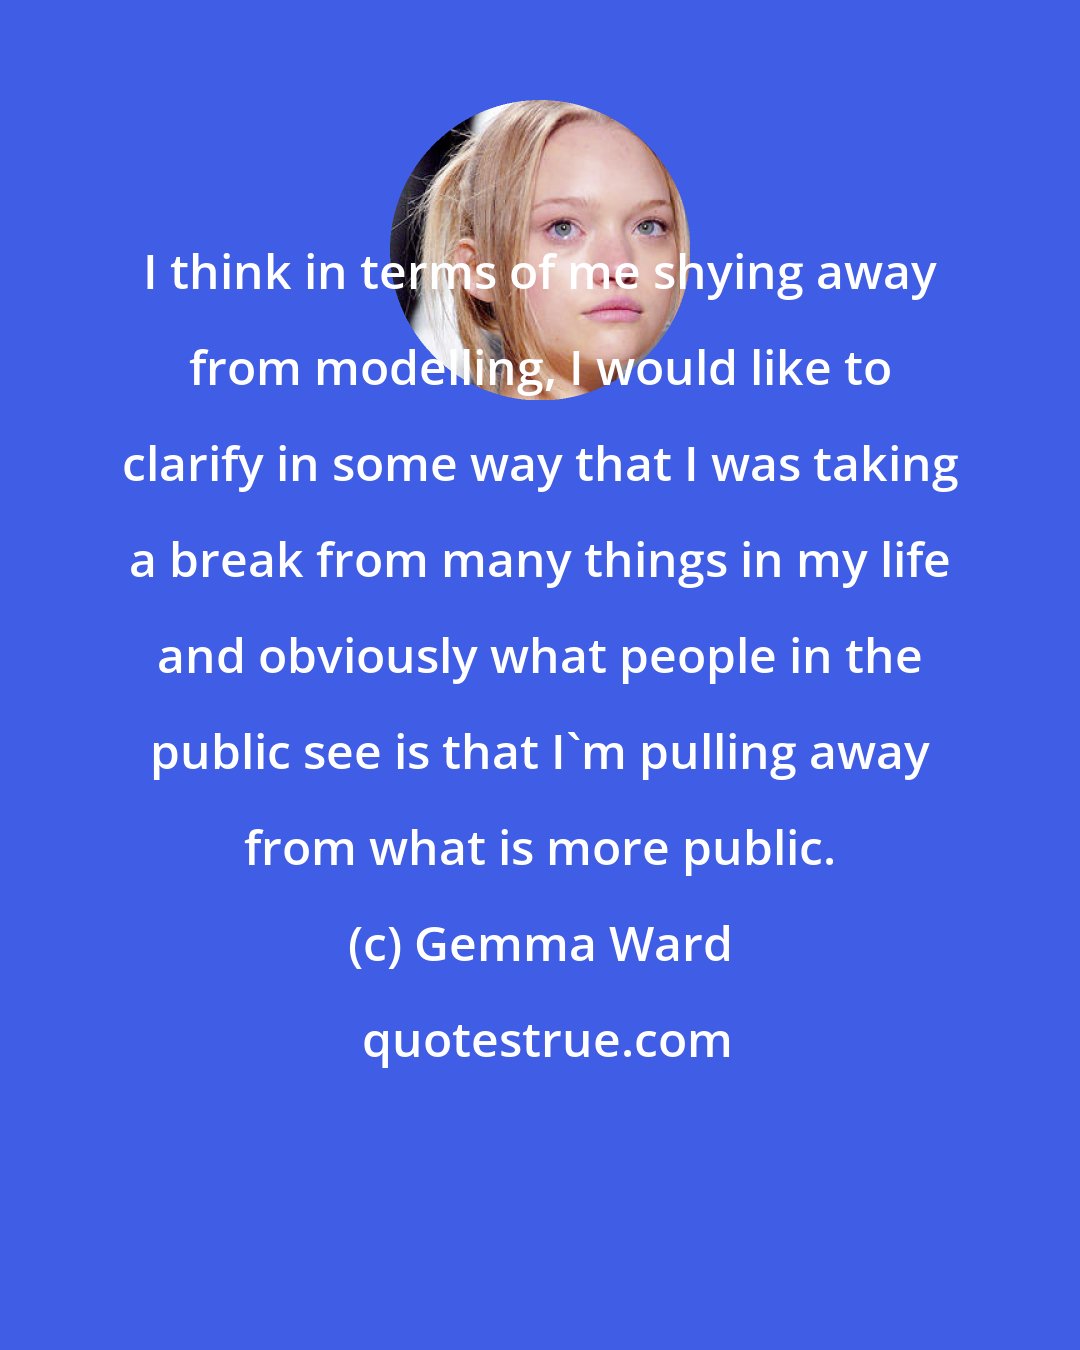 Gemma Ward: I think in terms of me shying away from modelling, I would like to clarify in some way that I was taking a break from many things in my life and obviously what people in the public see is that I'm pulling away from what is more public.